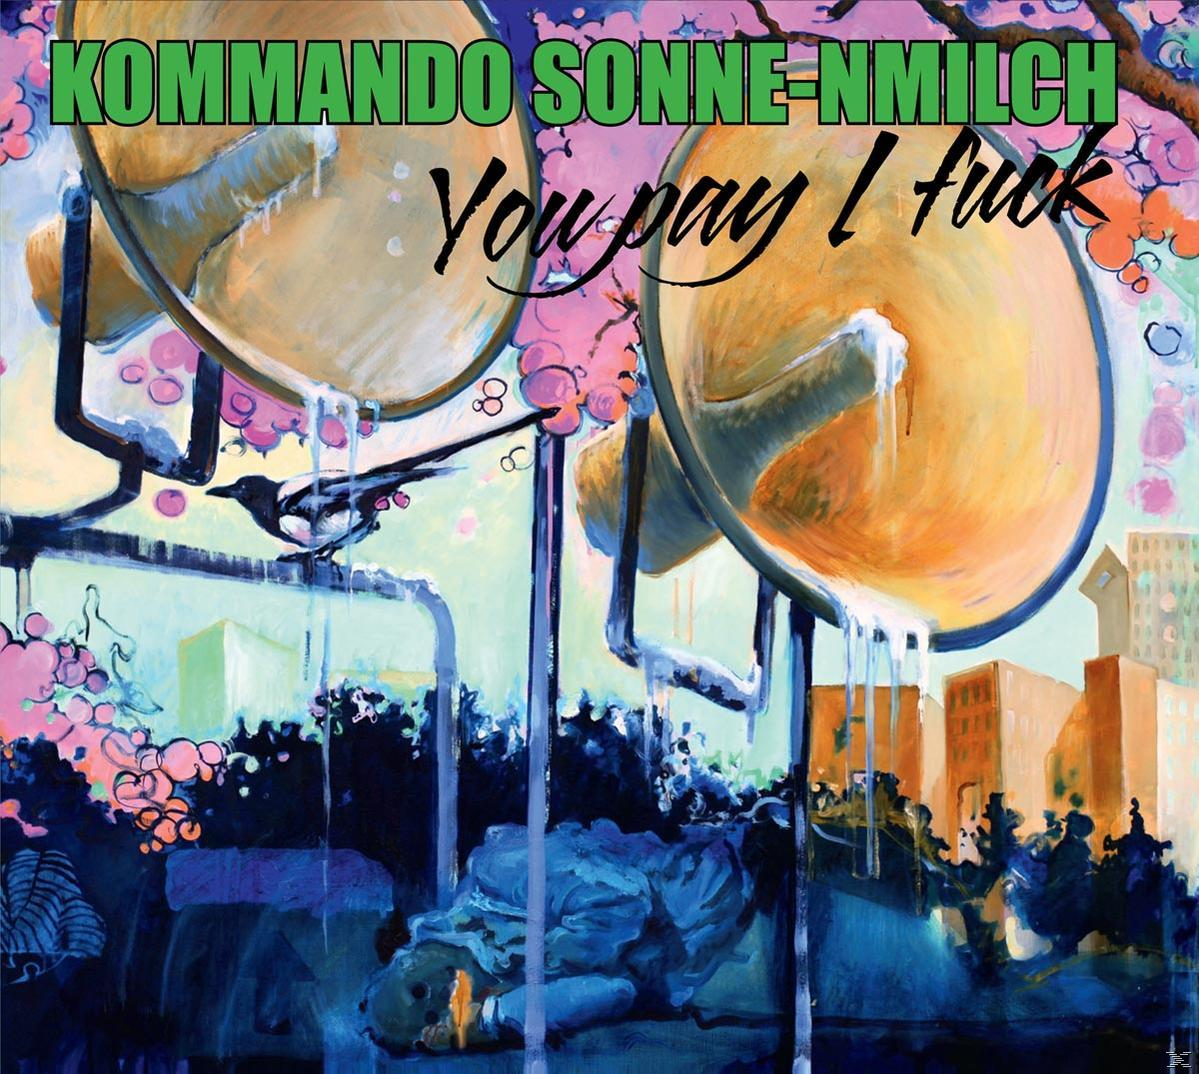 Kommando Sonne-nmilch - Pay Fuck - (CD) You I